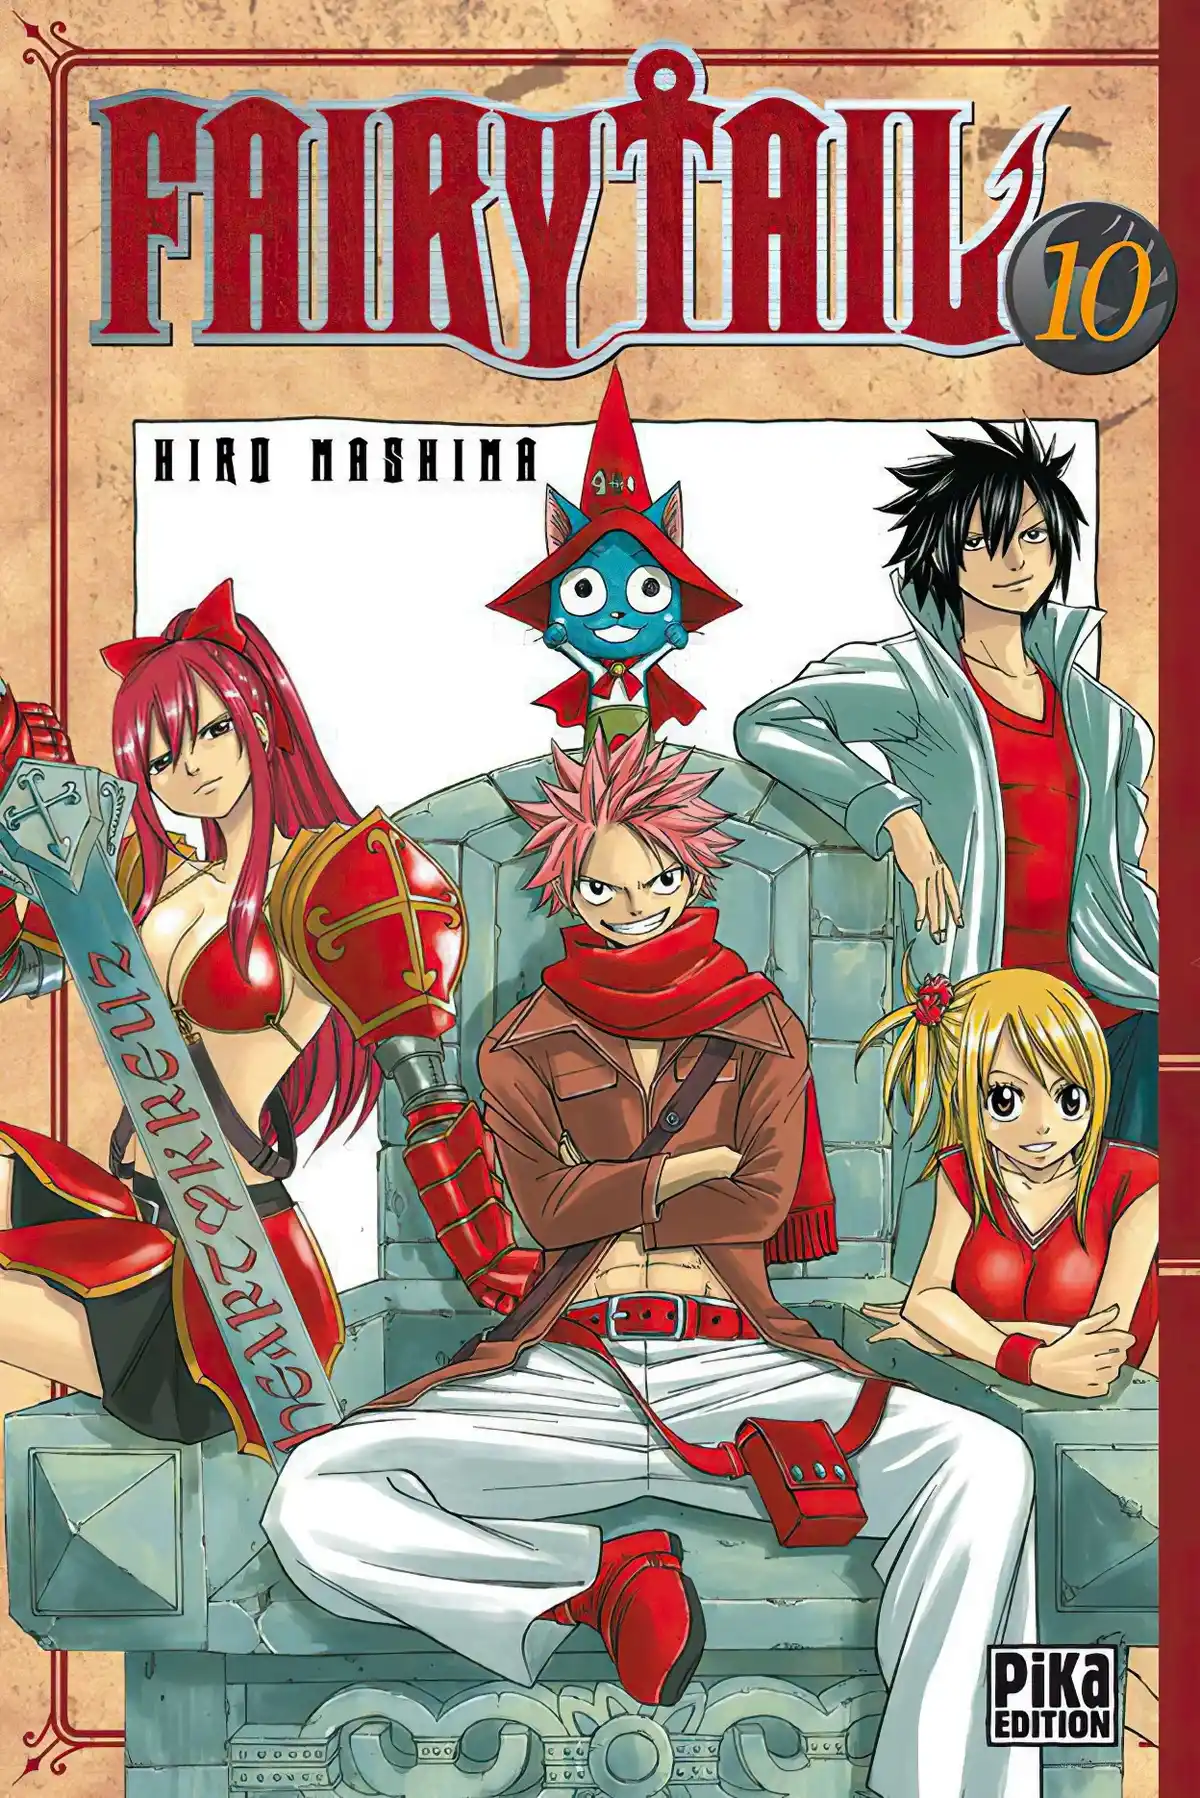 Fairy Tail Volume 10 page 1